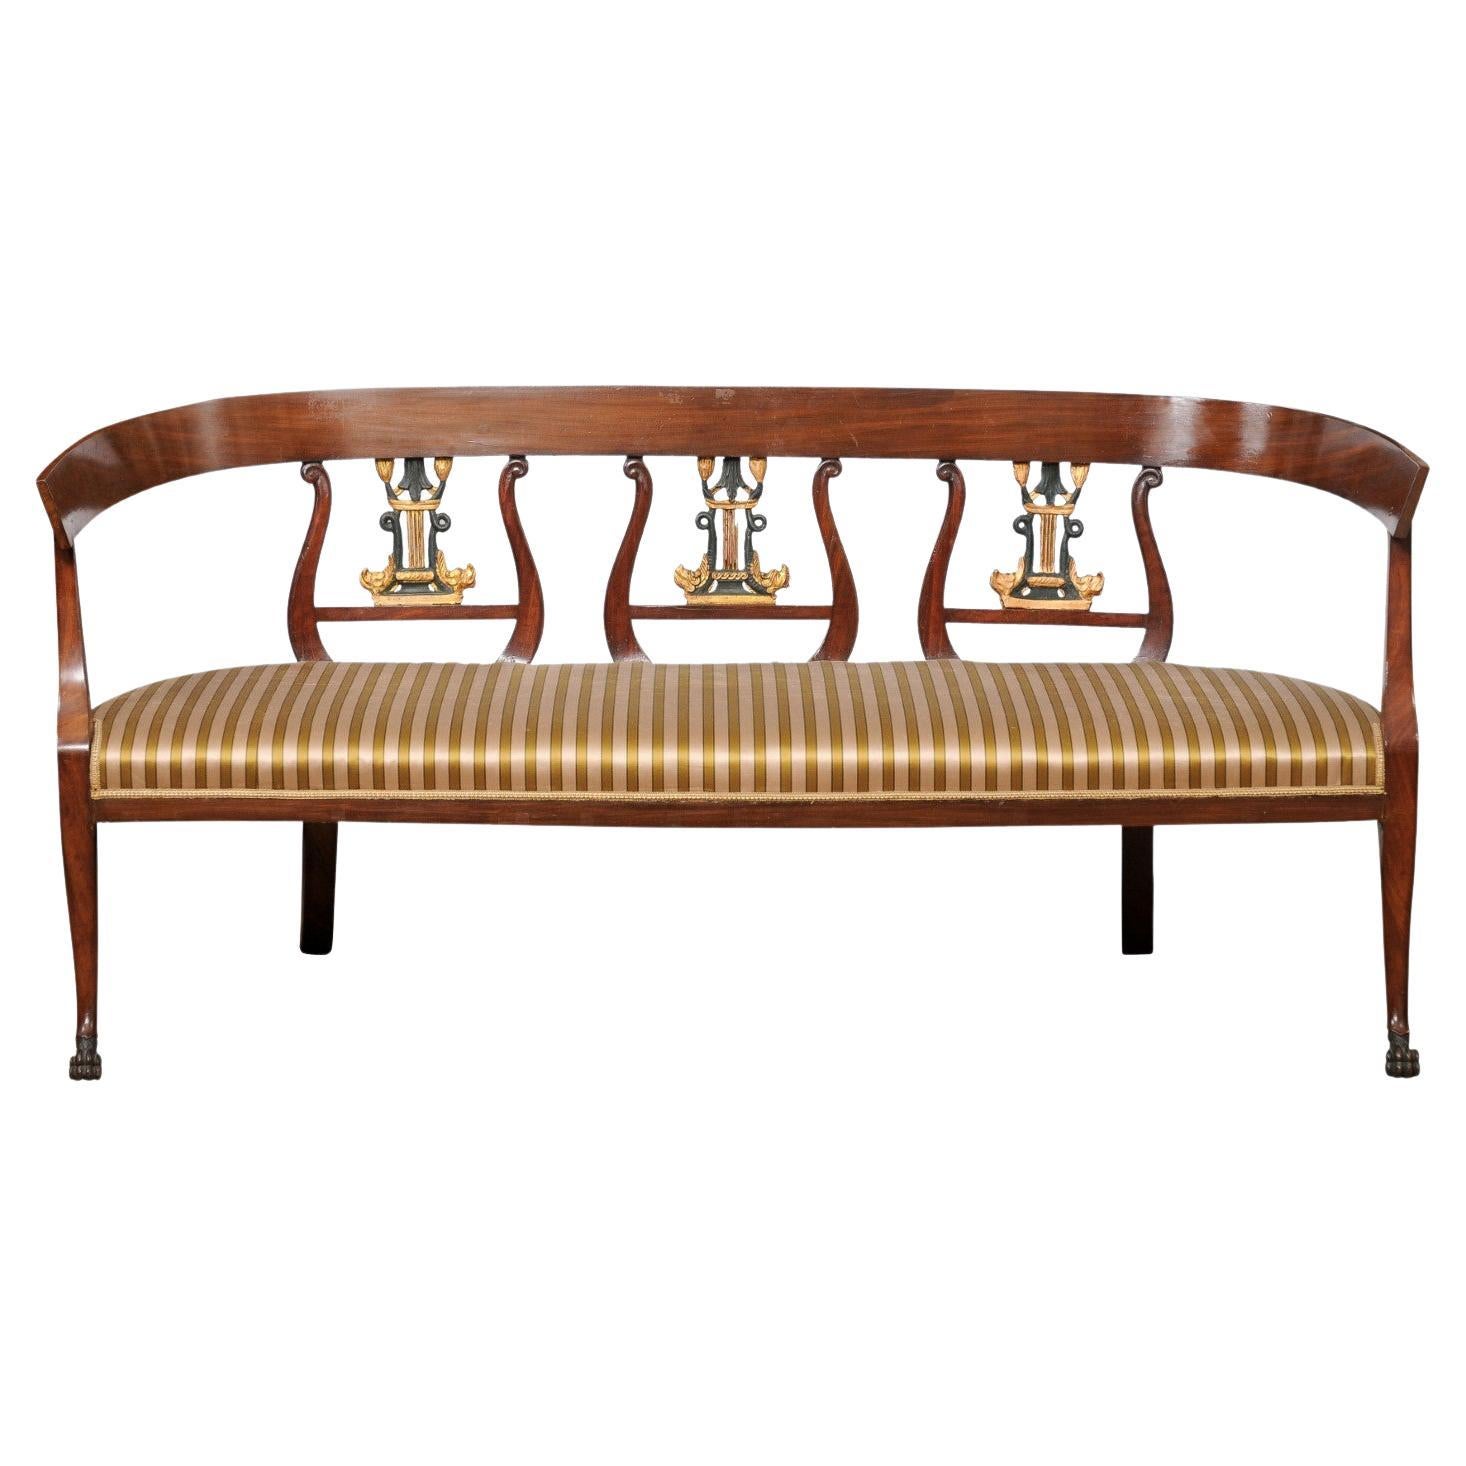 19th Century Swedish Neoclassical Settee in Mahogany  For Sale